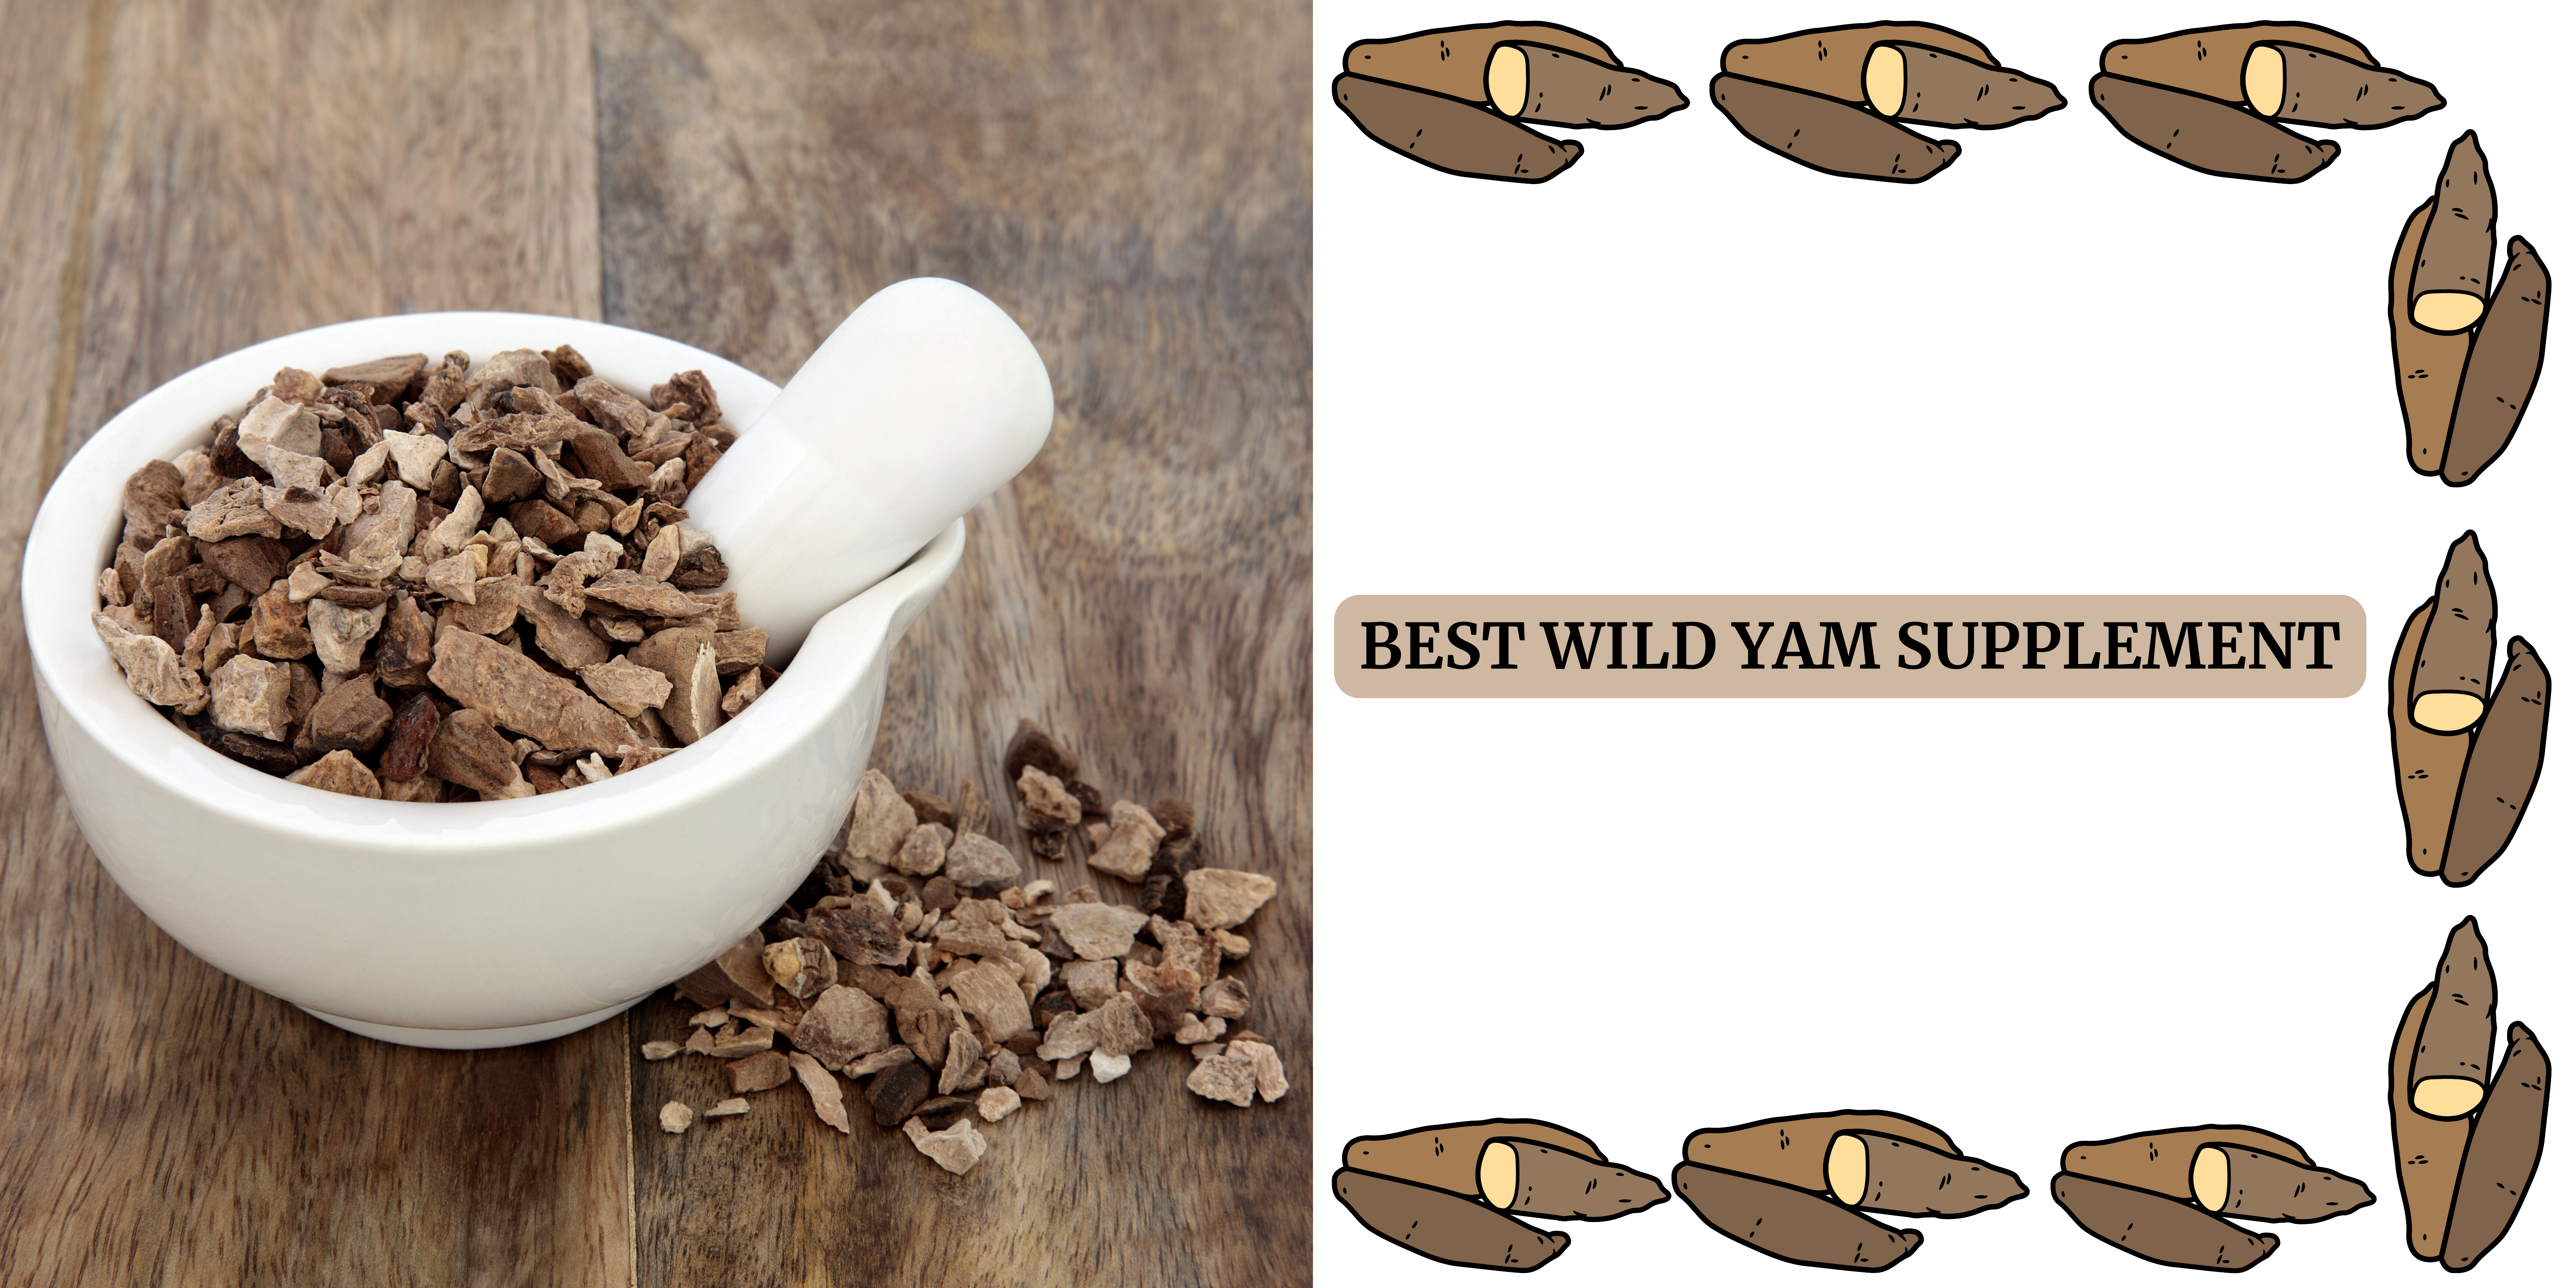 Wild Yam Supplement in Italy